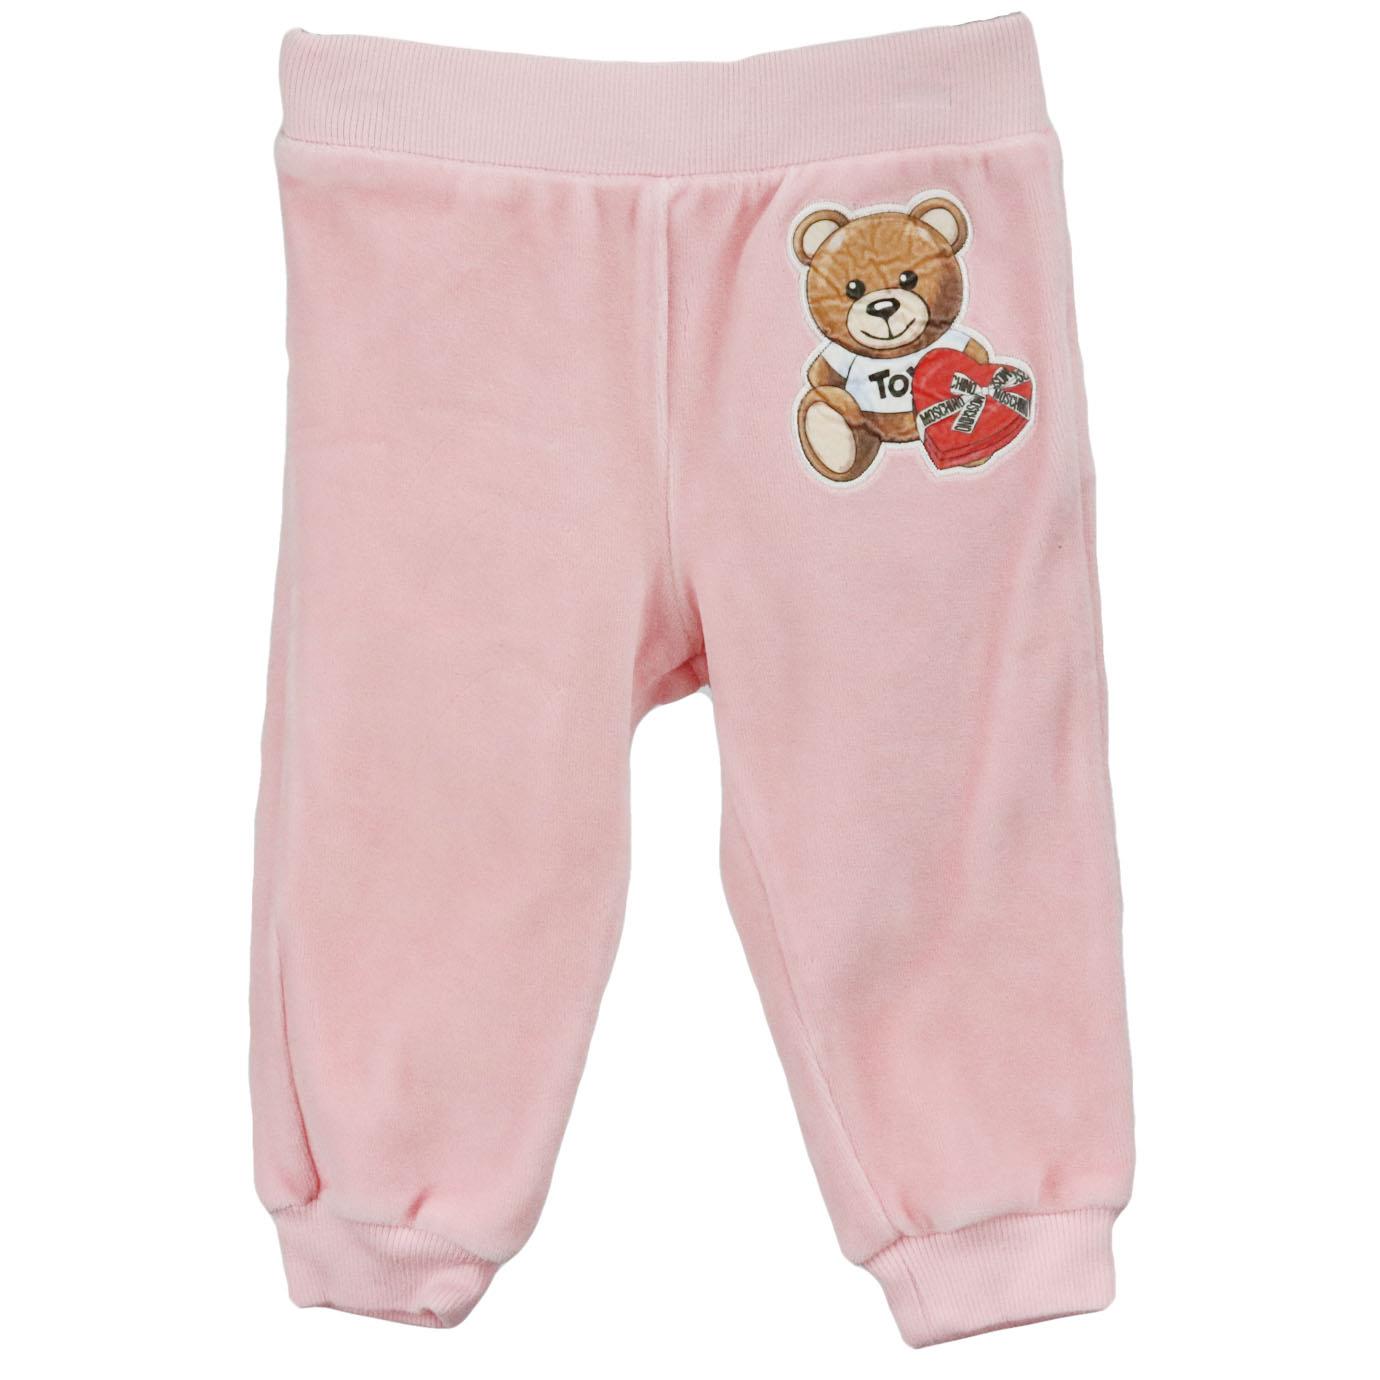 MOSCHINO BABY GIRLS LOGO VELOUR TRACKSUIT 6-9 MONTHS